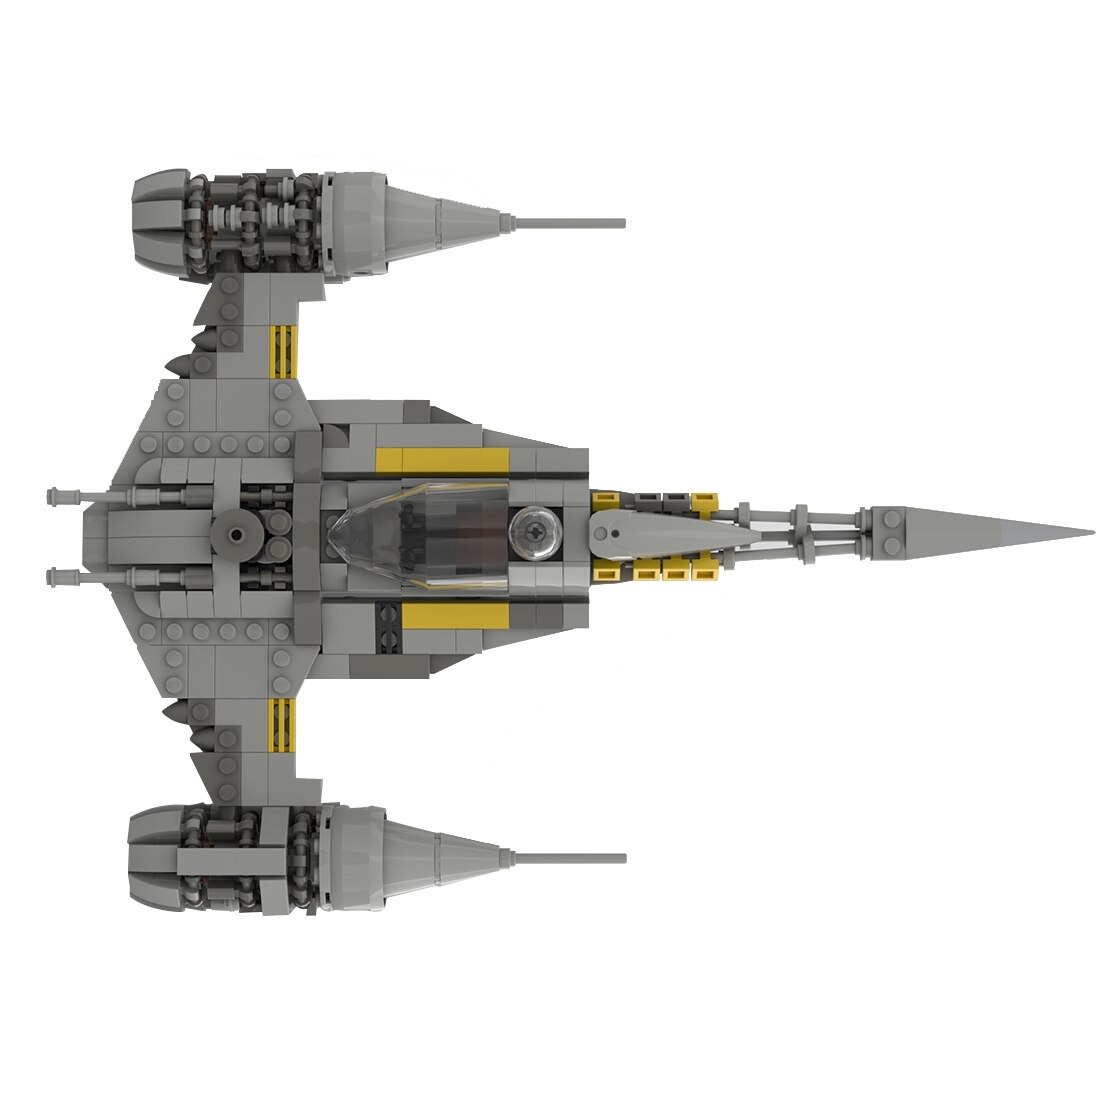 authorized moc 100546 n 1 starfighter bui main 1 1 - DECOOL